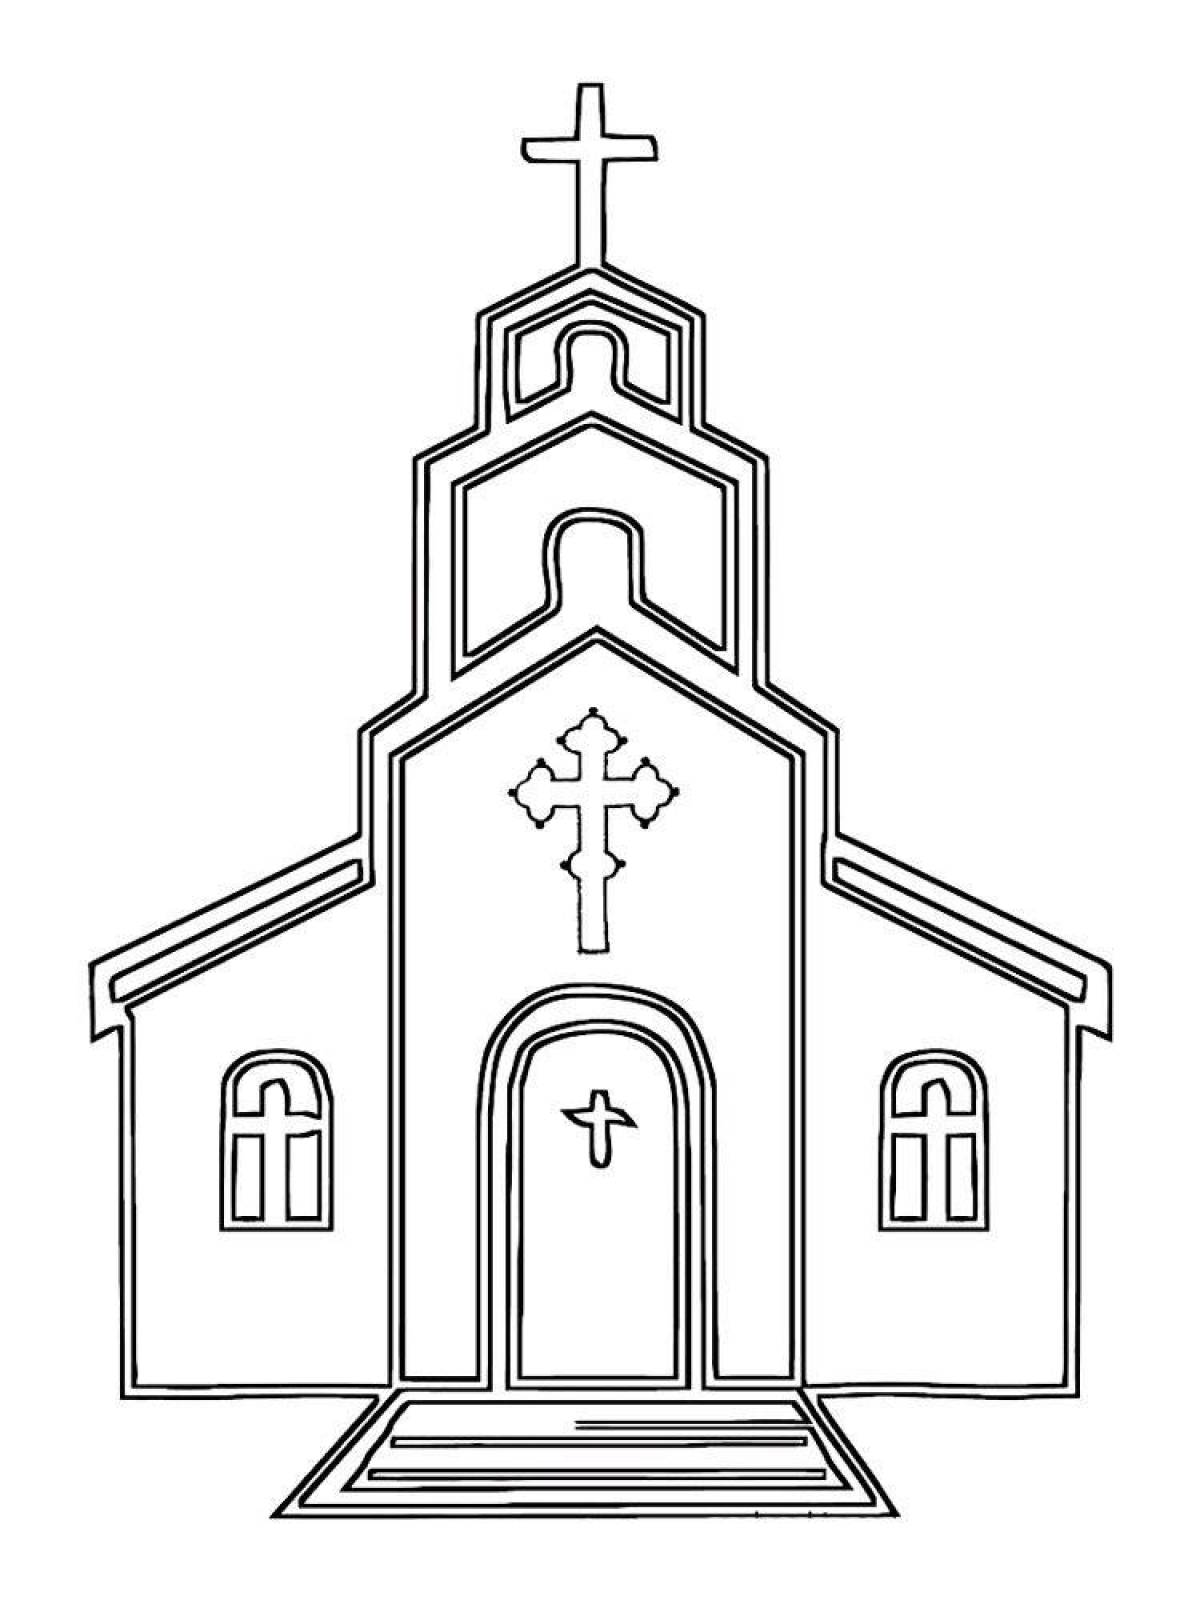 Bright temple coloring page